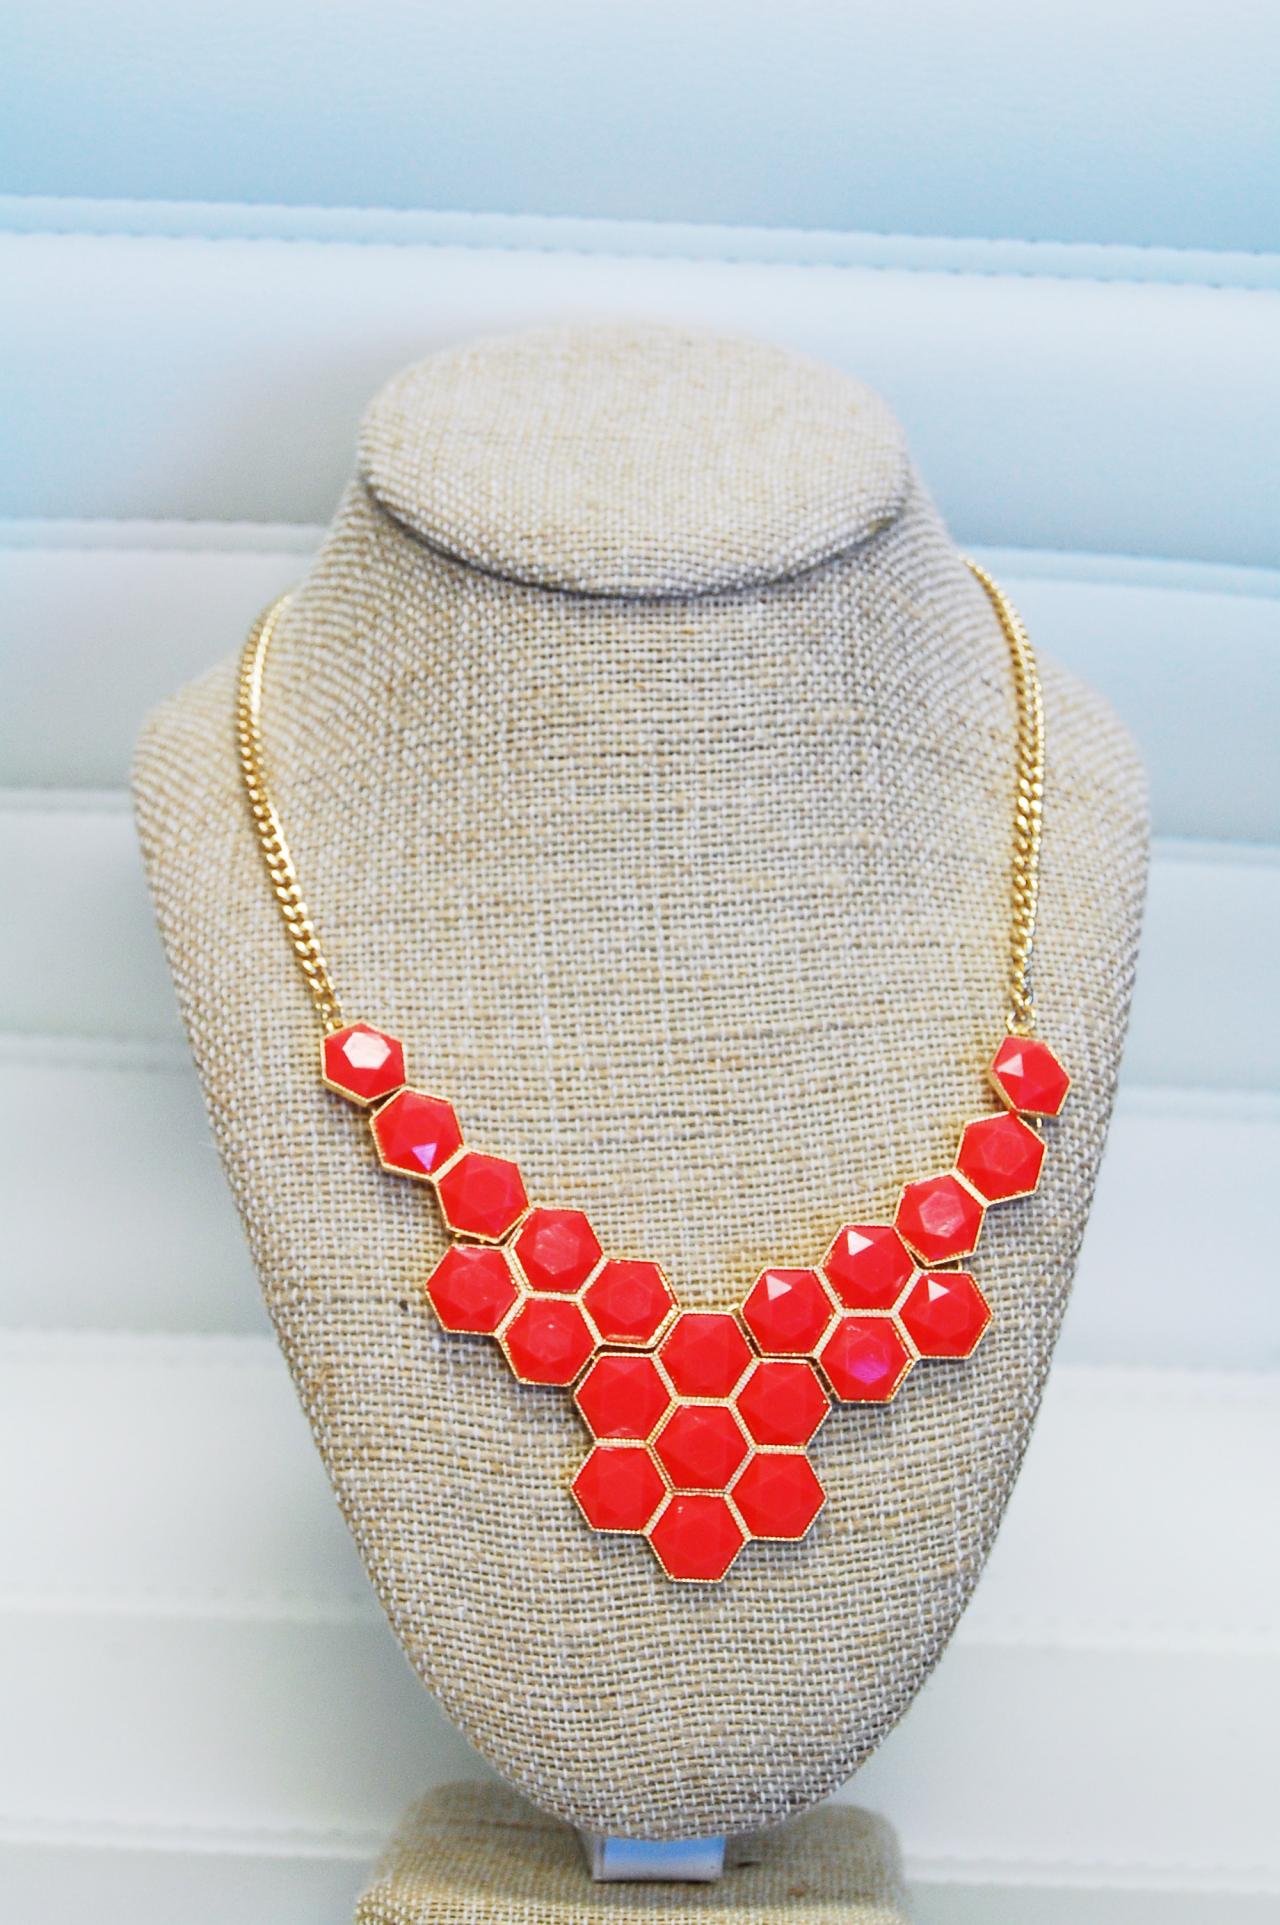 Honeycomb Necklace Coral Statement